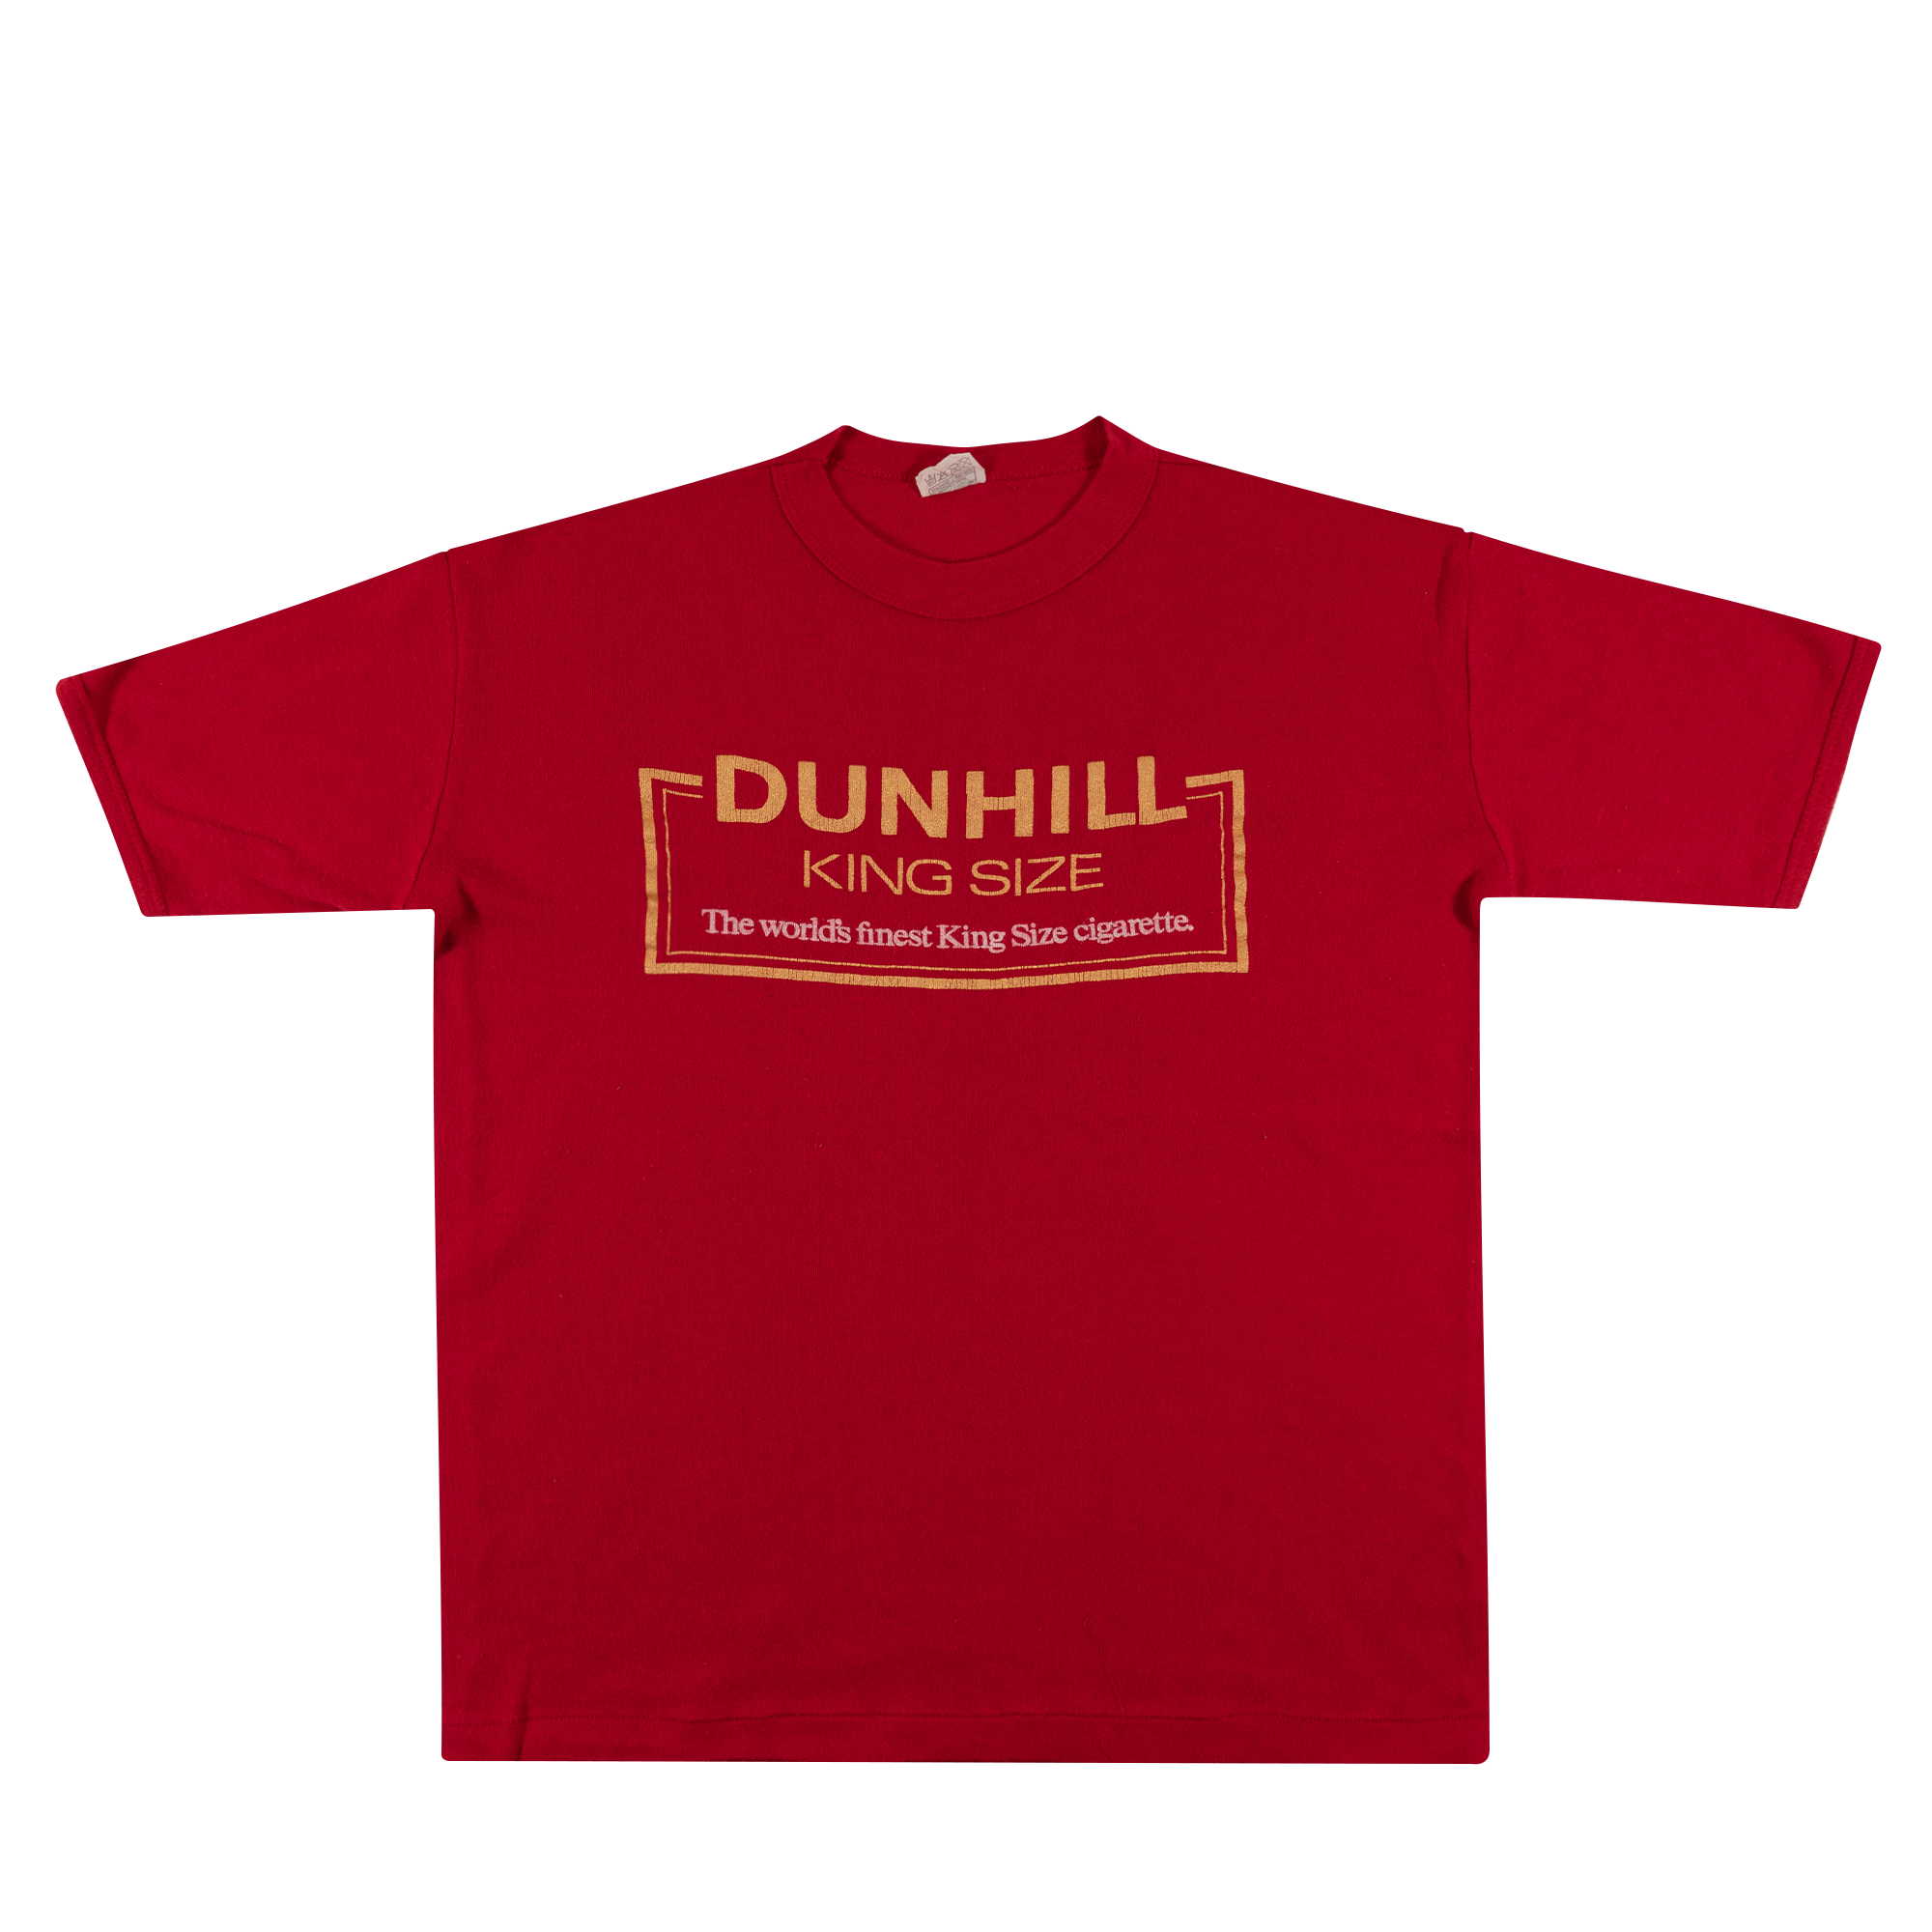 Dunhill King Size Cigarette Tee Red-PLUS